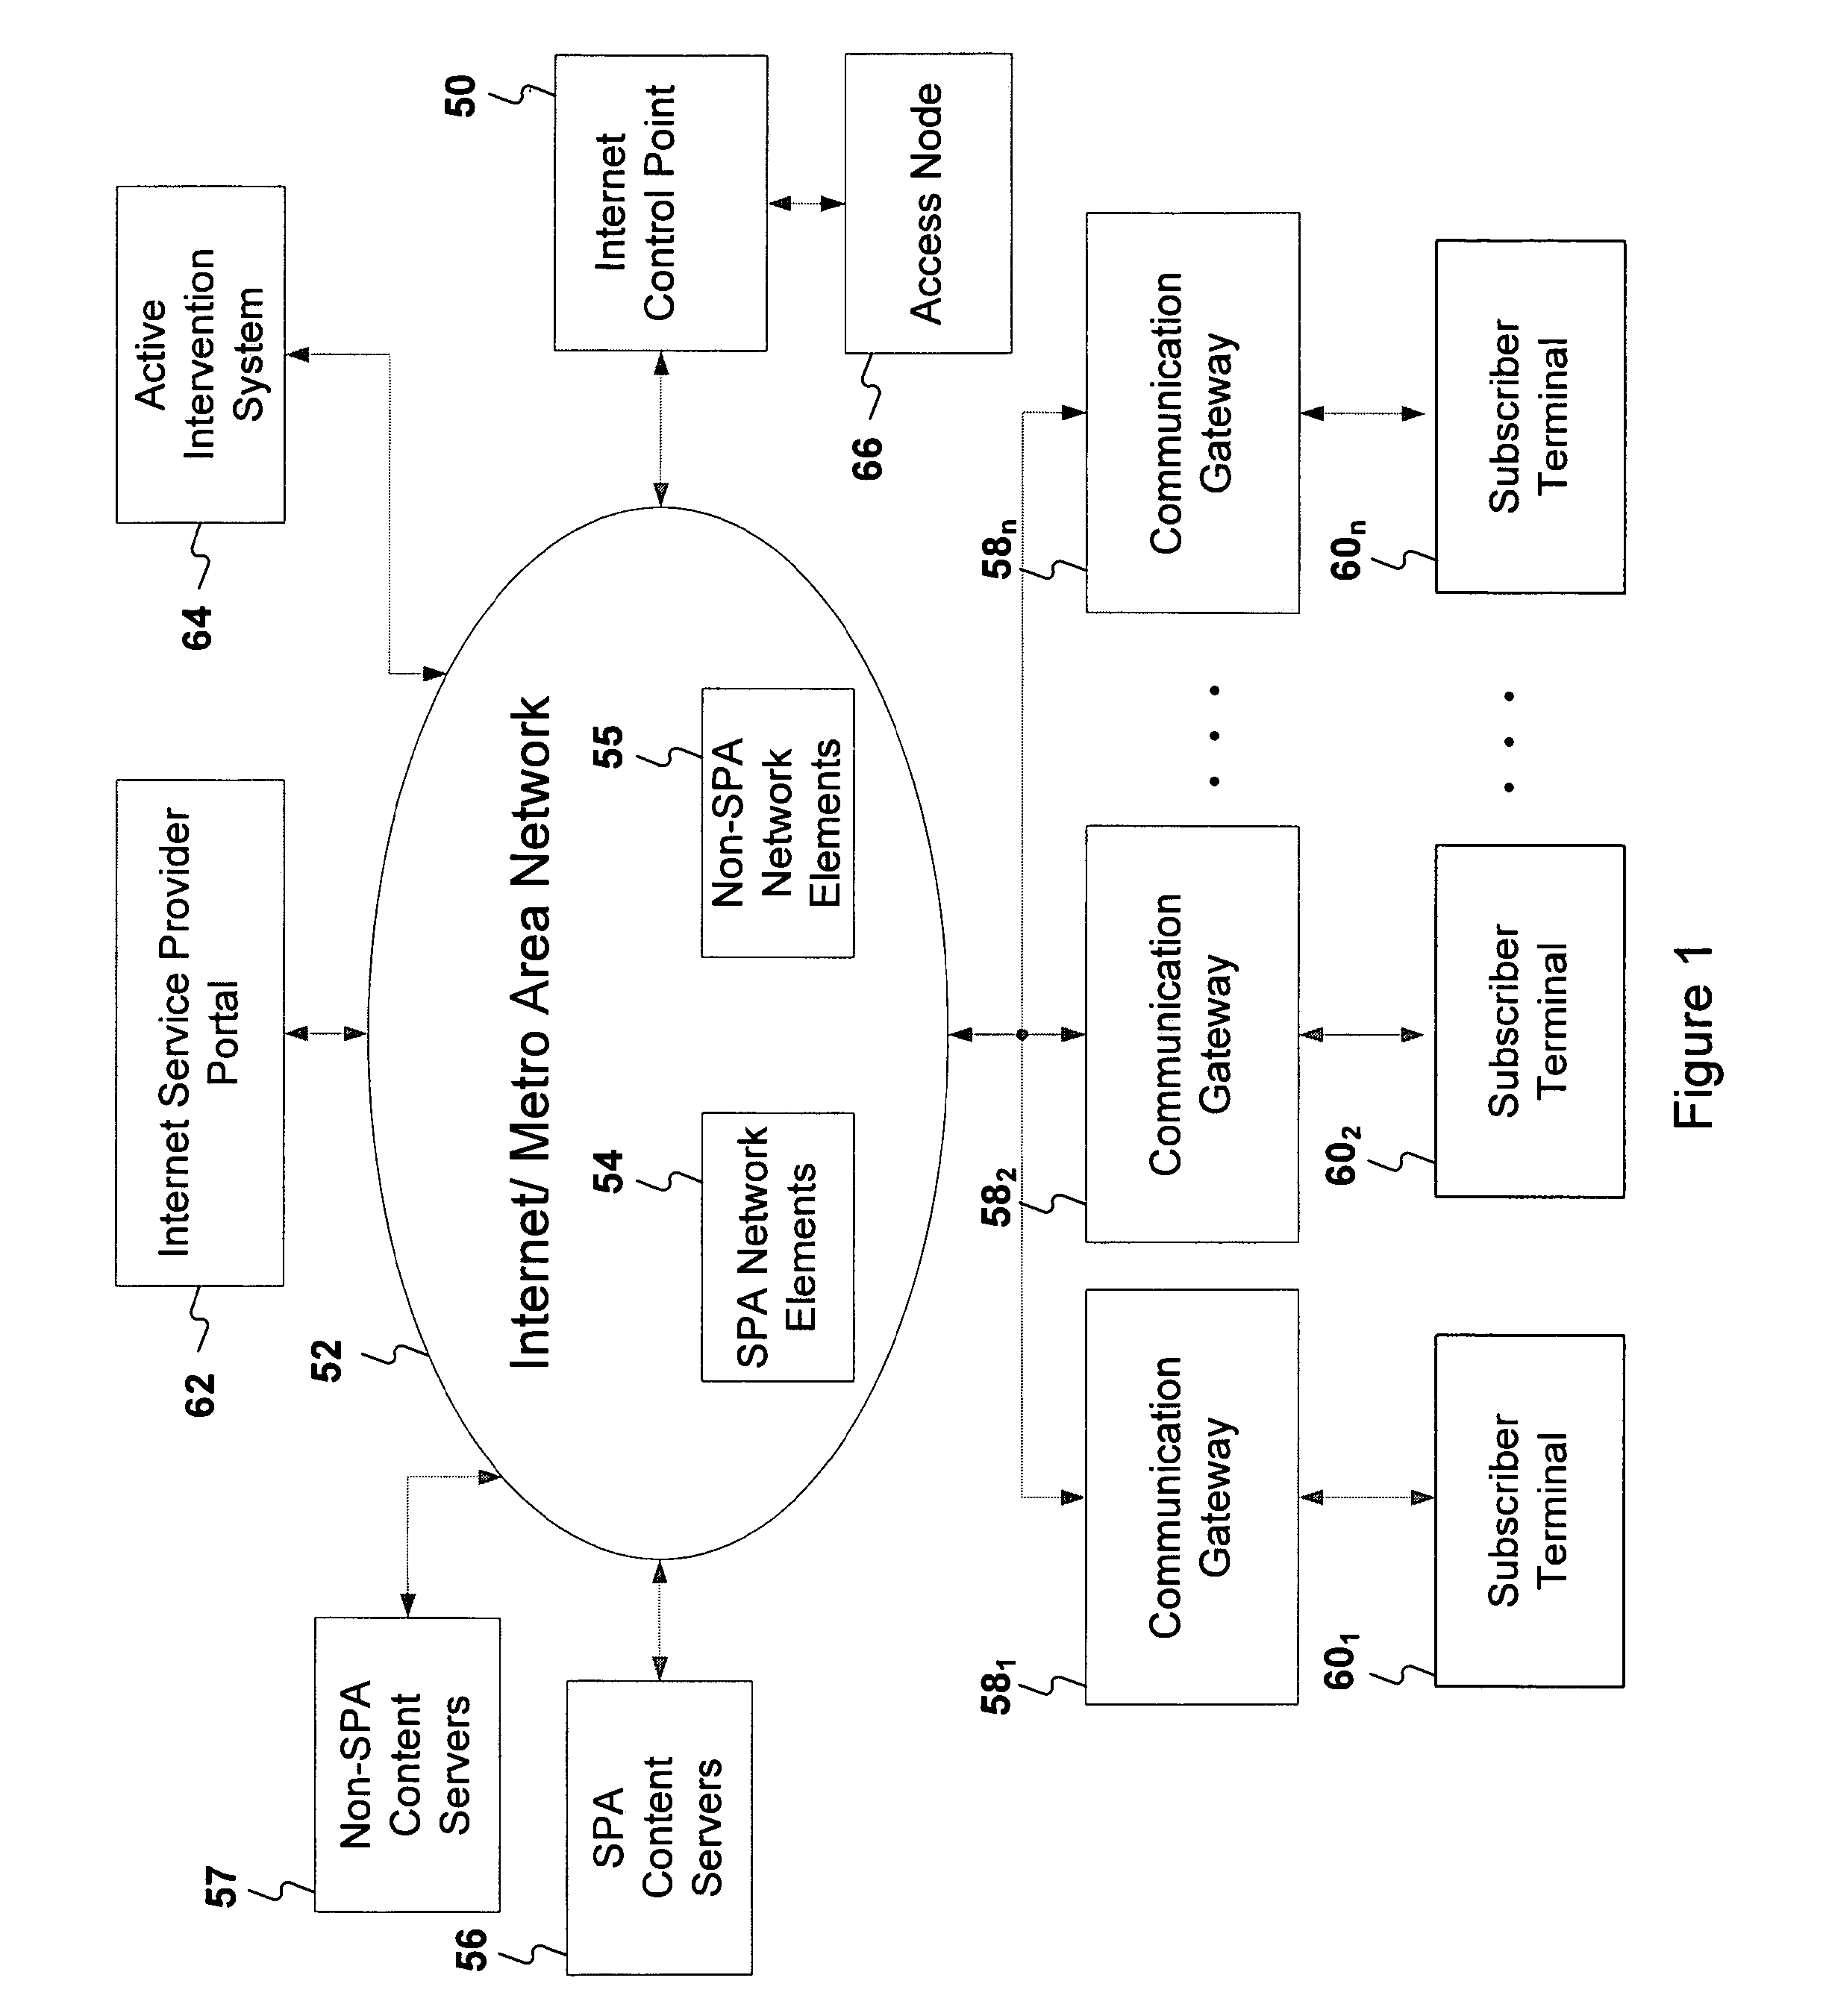 System for regulating access to and distributing content in a network